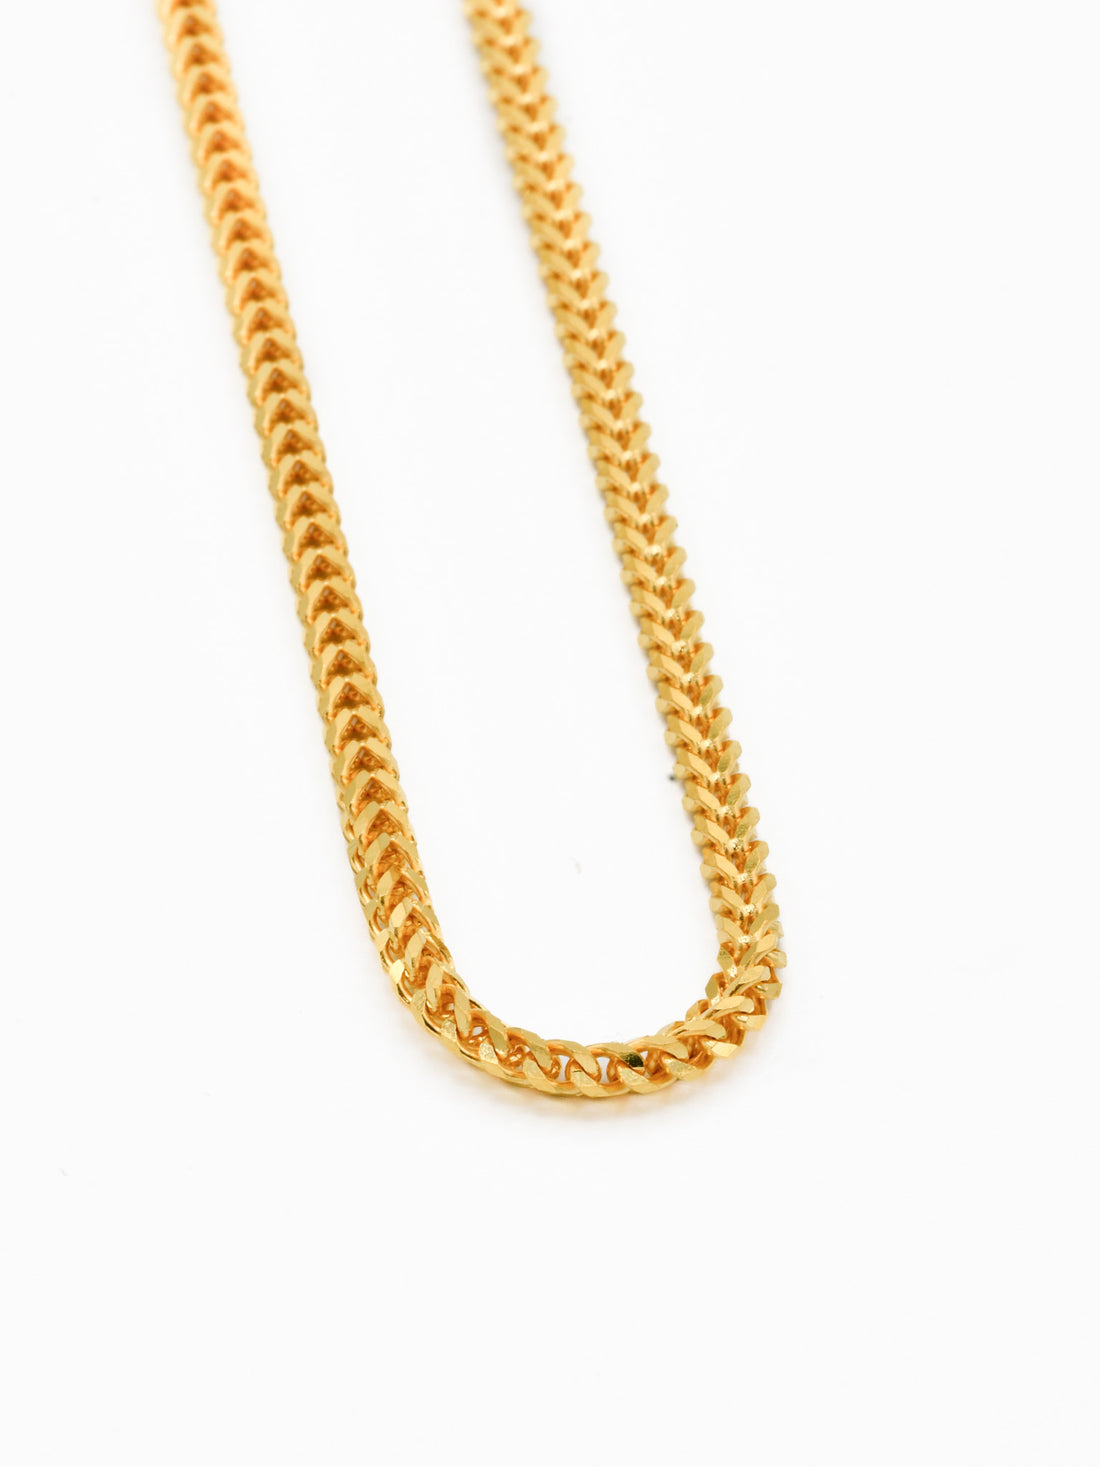 22ct Gold Fox Tail Chain - Roop Darshan